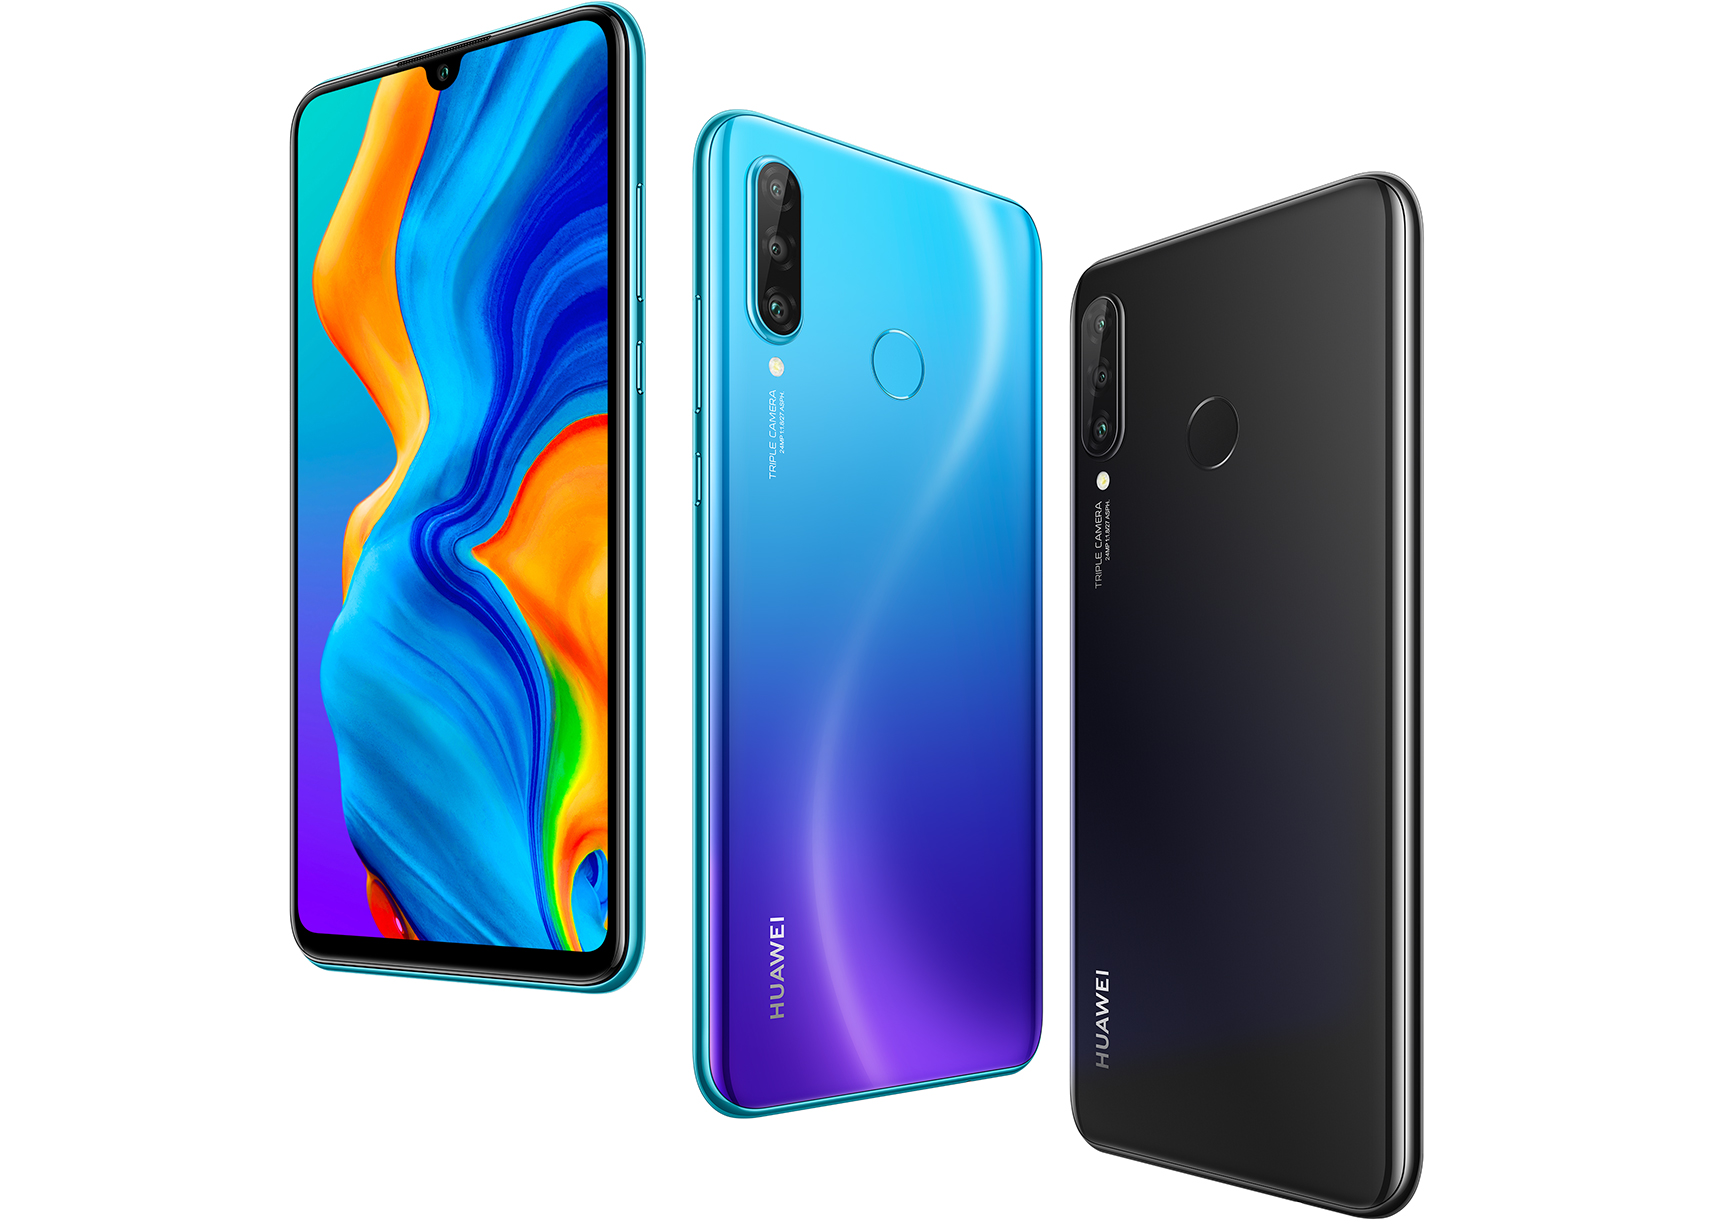 Huawei, P30 Lite, Amazon, India, Chinese smartphone, Mobile phones, Gadget news, Technology news